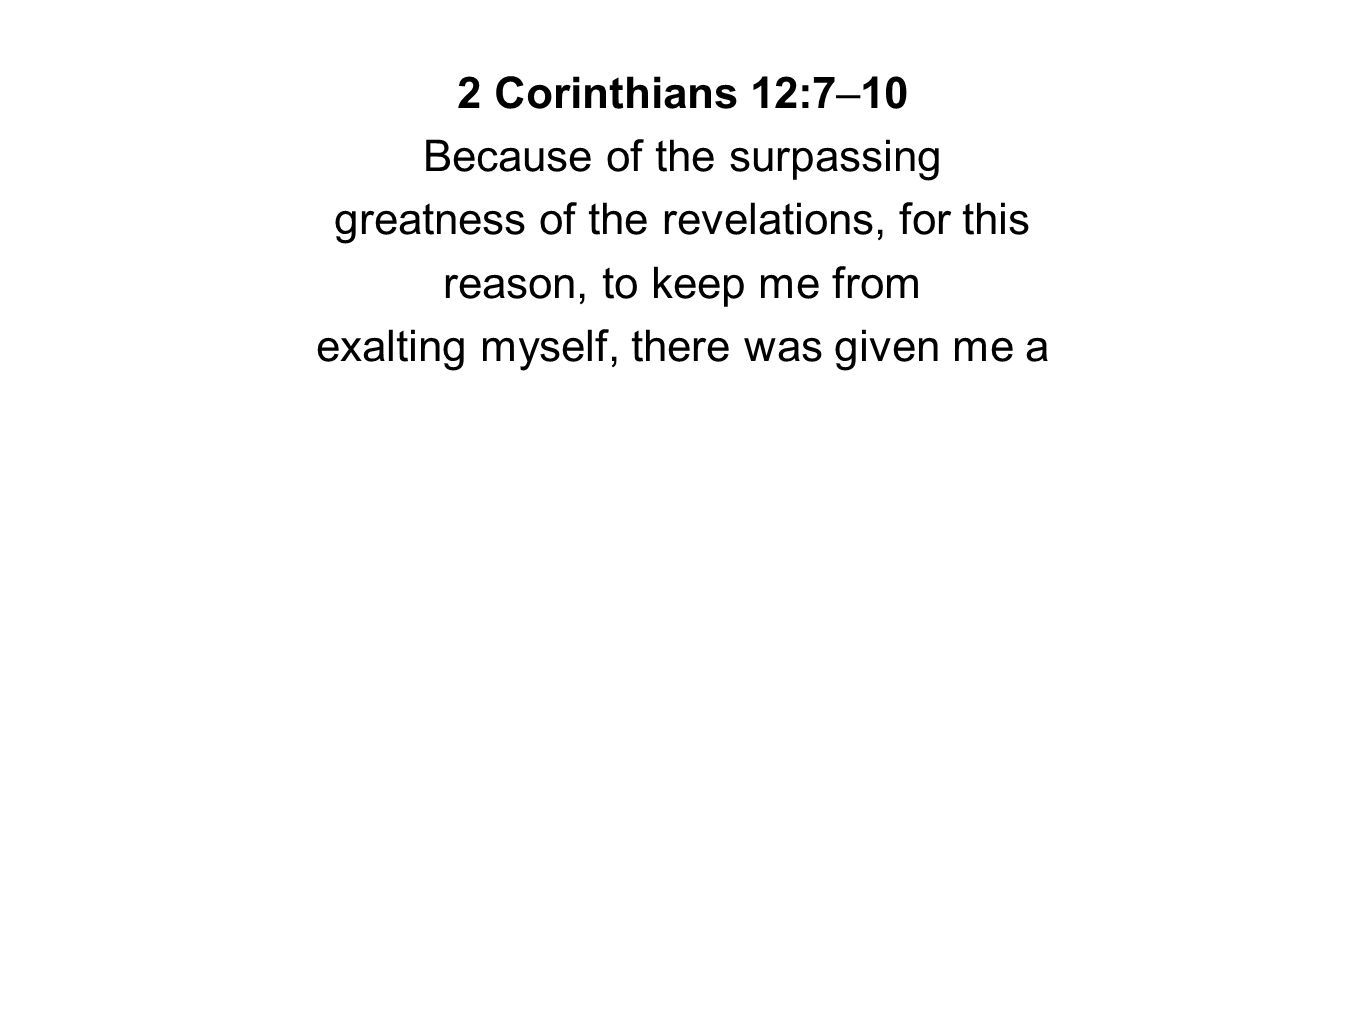 2 Corinthians 12:7–10 Because of the surpassing greatness of the revelations, for this reason, to keep me from exalting myself, there was given me a